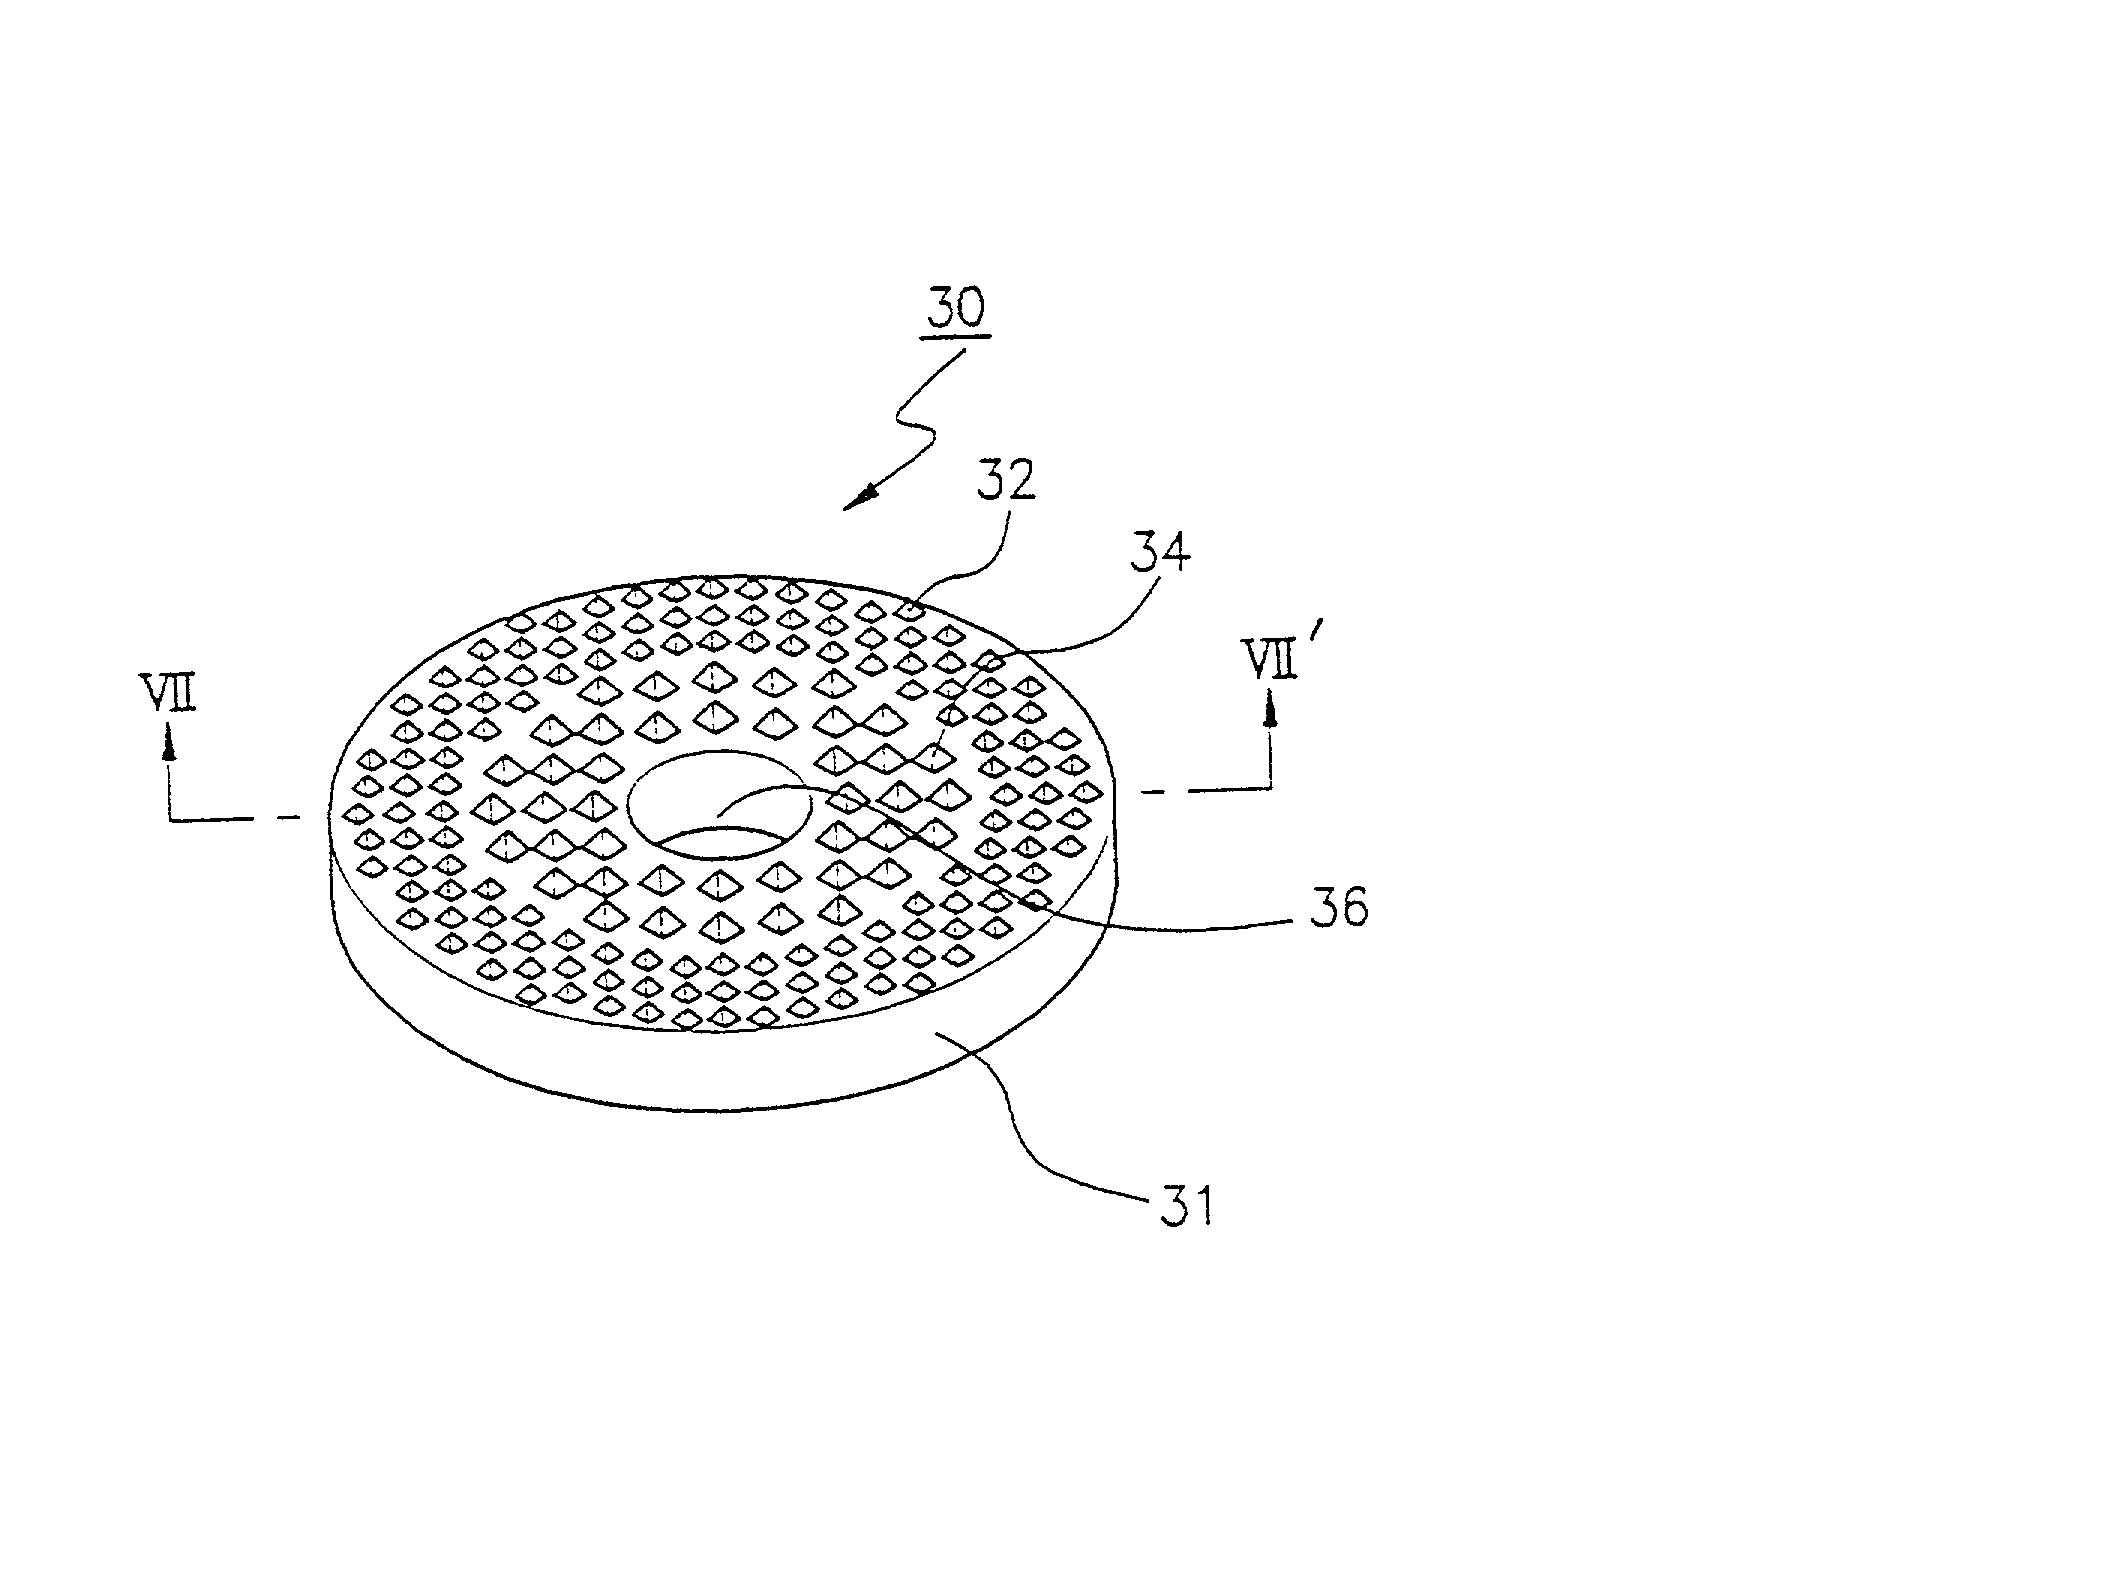 Conditioner and conditioning disk for a CMP pad, and method of fabricating, reworking, and cleaning conditioning disk